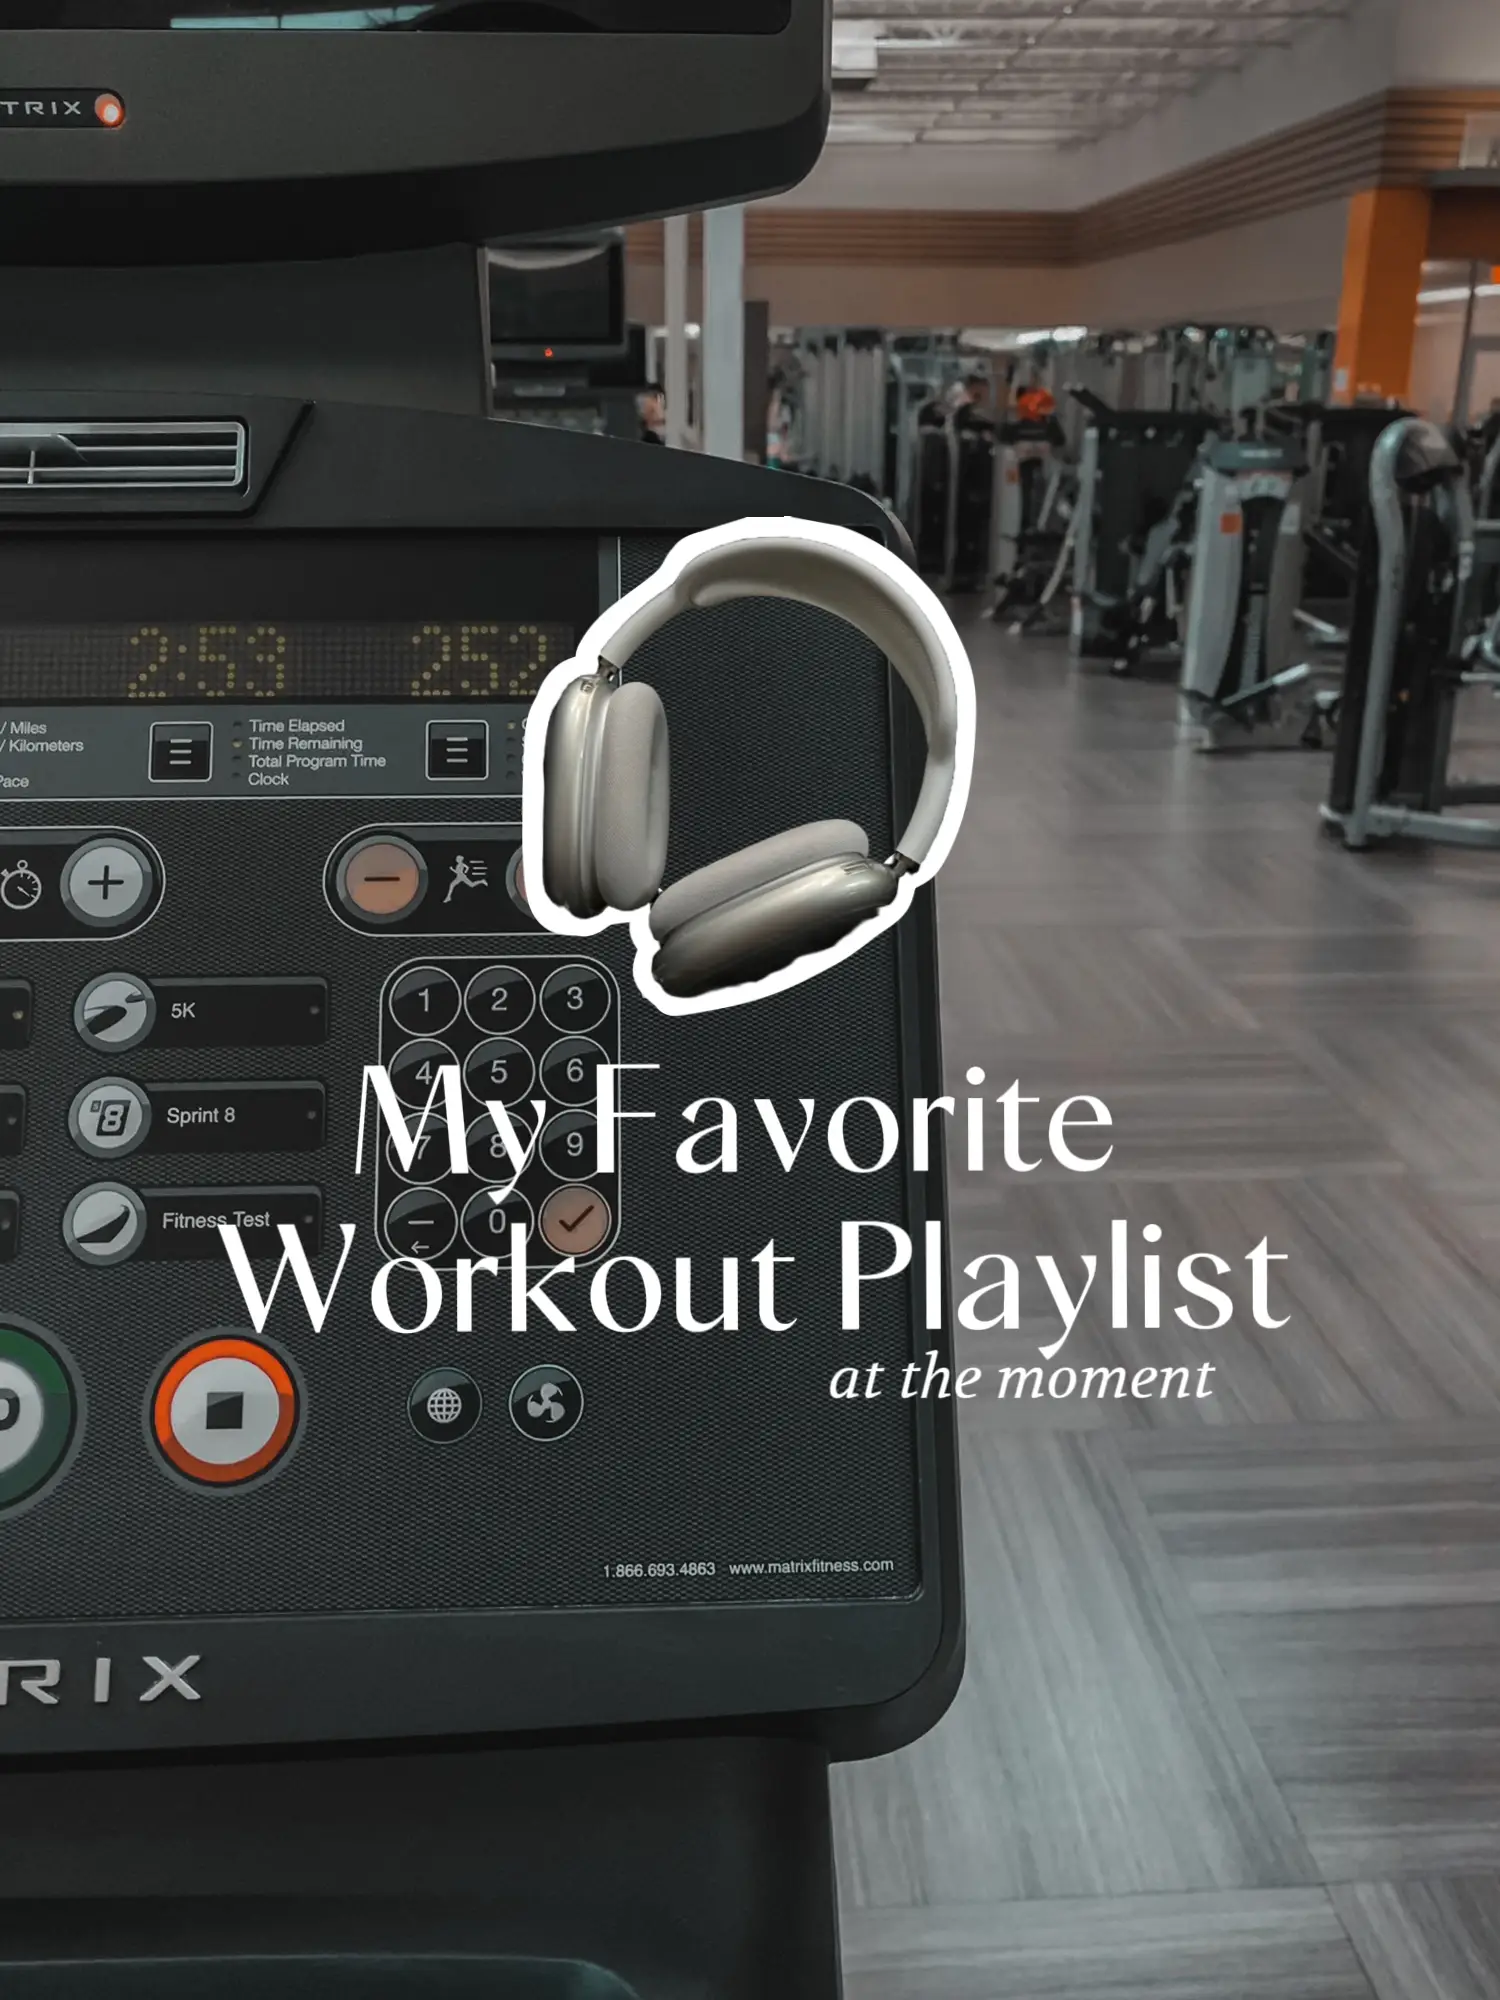 My favourite workout music playlist ! Get motivation for the perfect gym or  running workout session. Enjoy ! : r/spotify